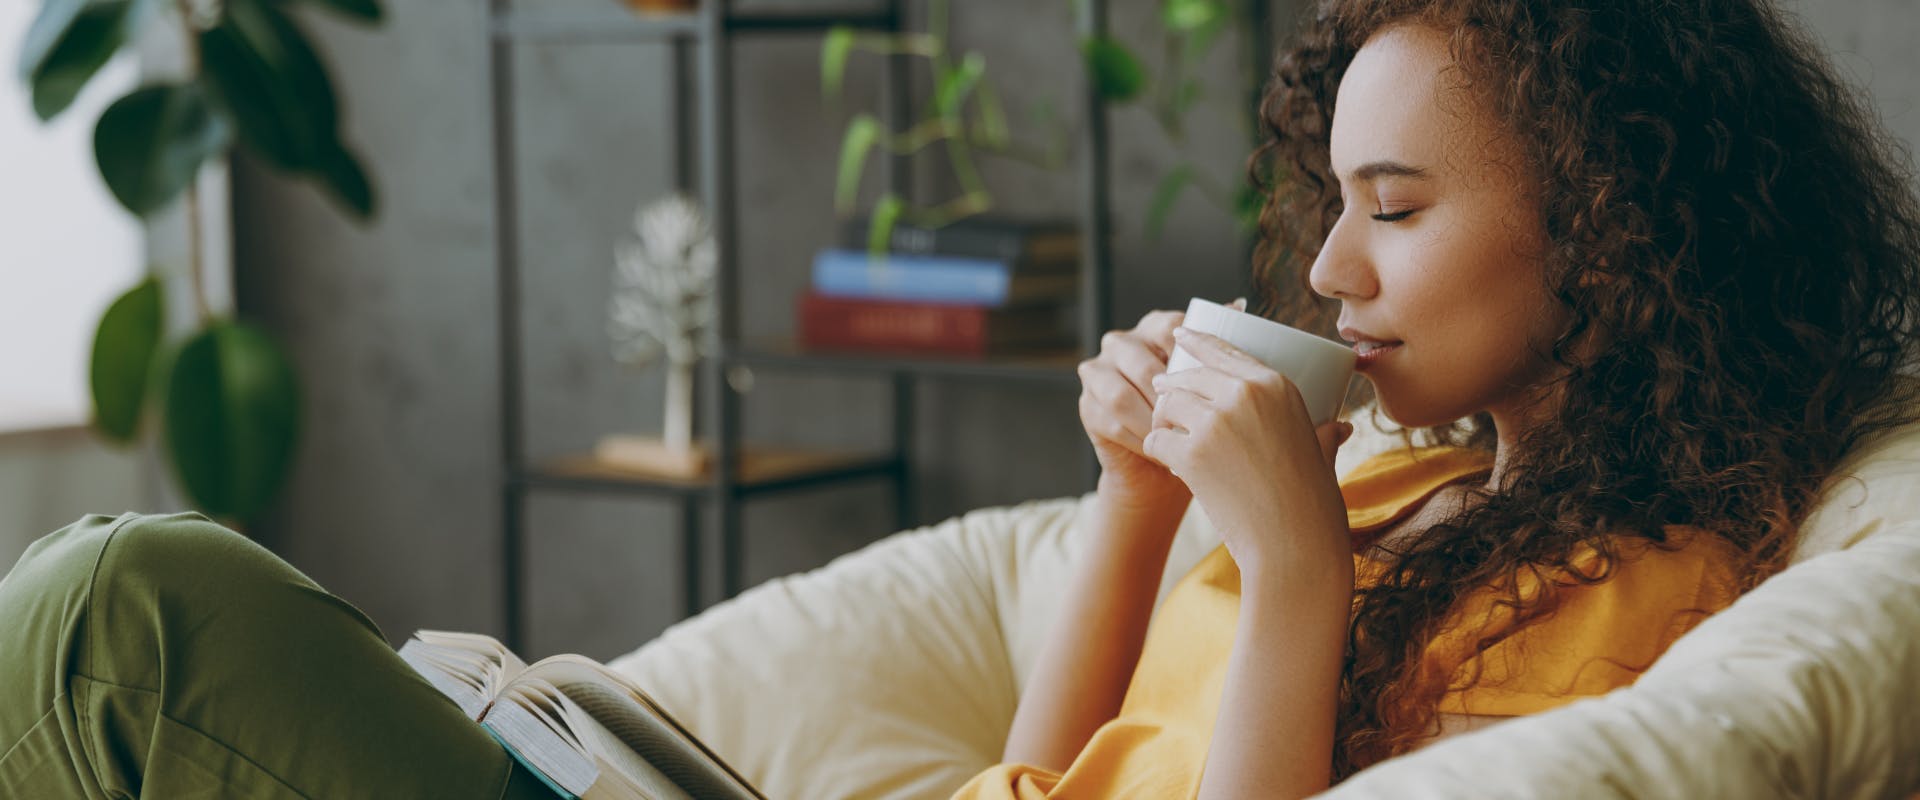 A woman enjoys slowing down with a cup of coffee and a book.